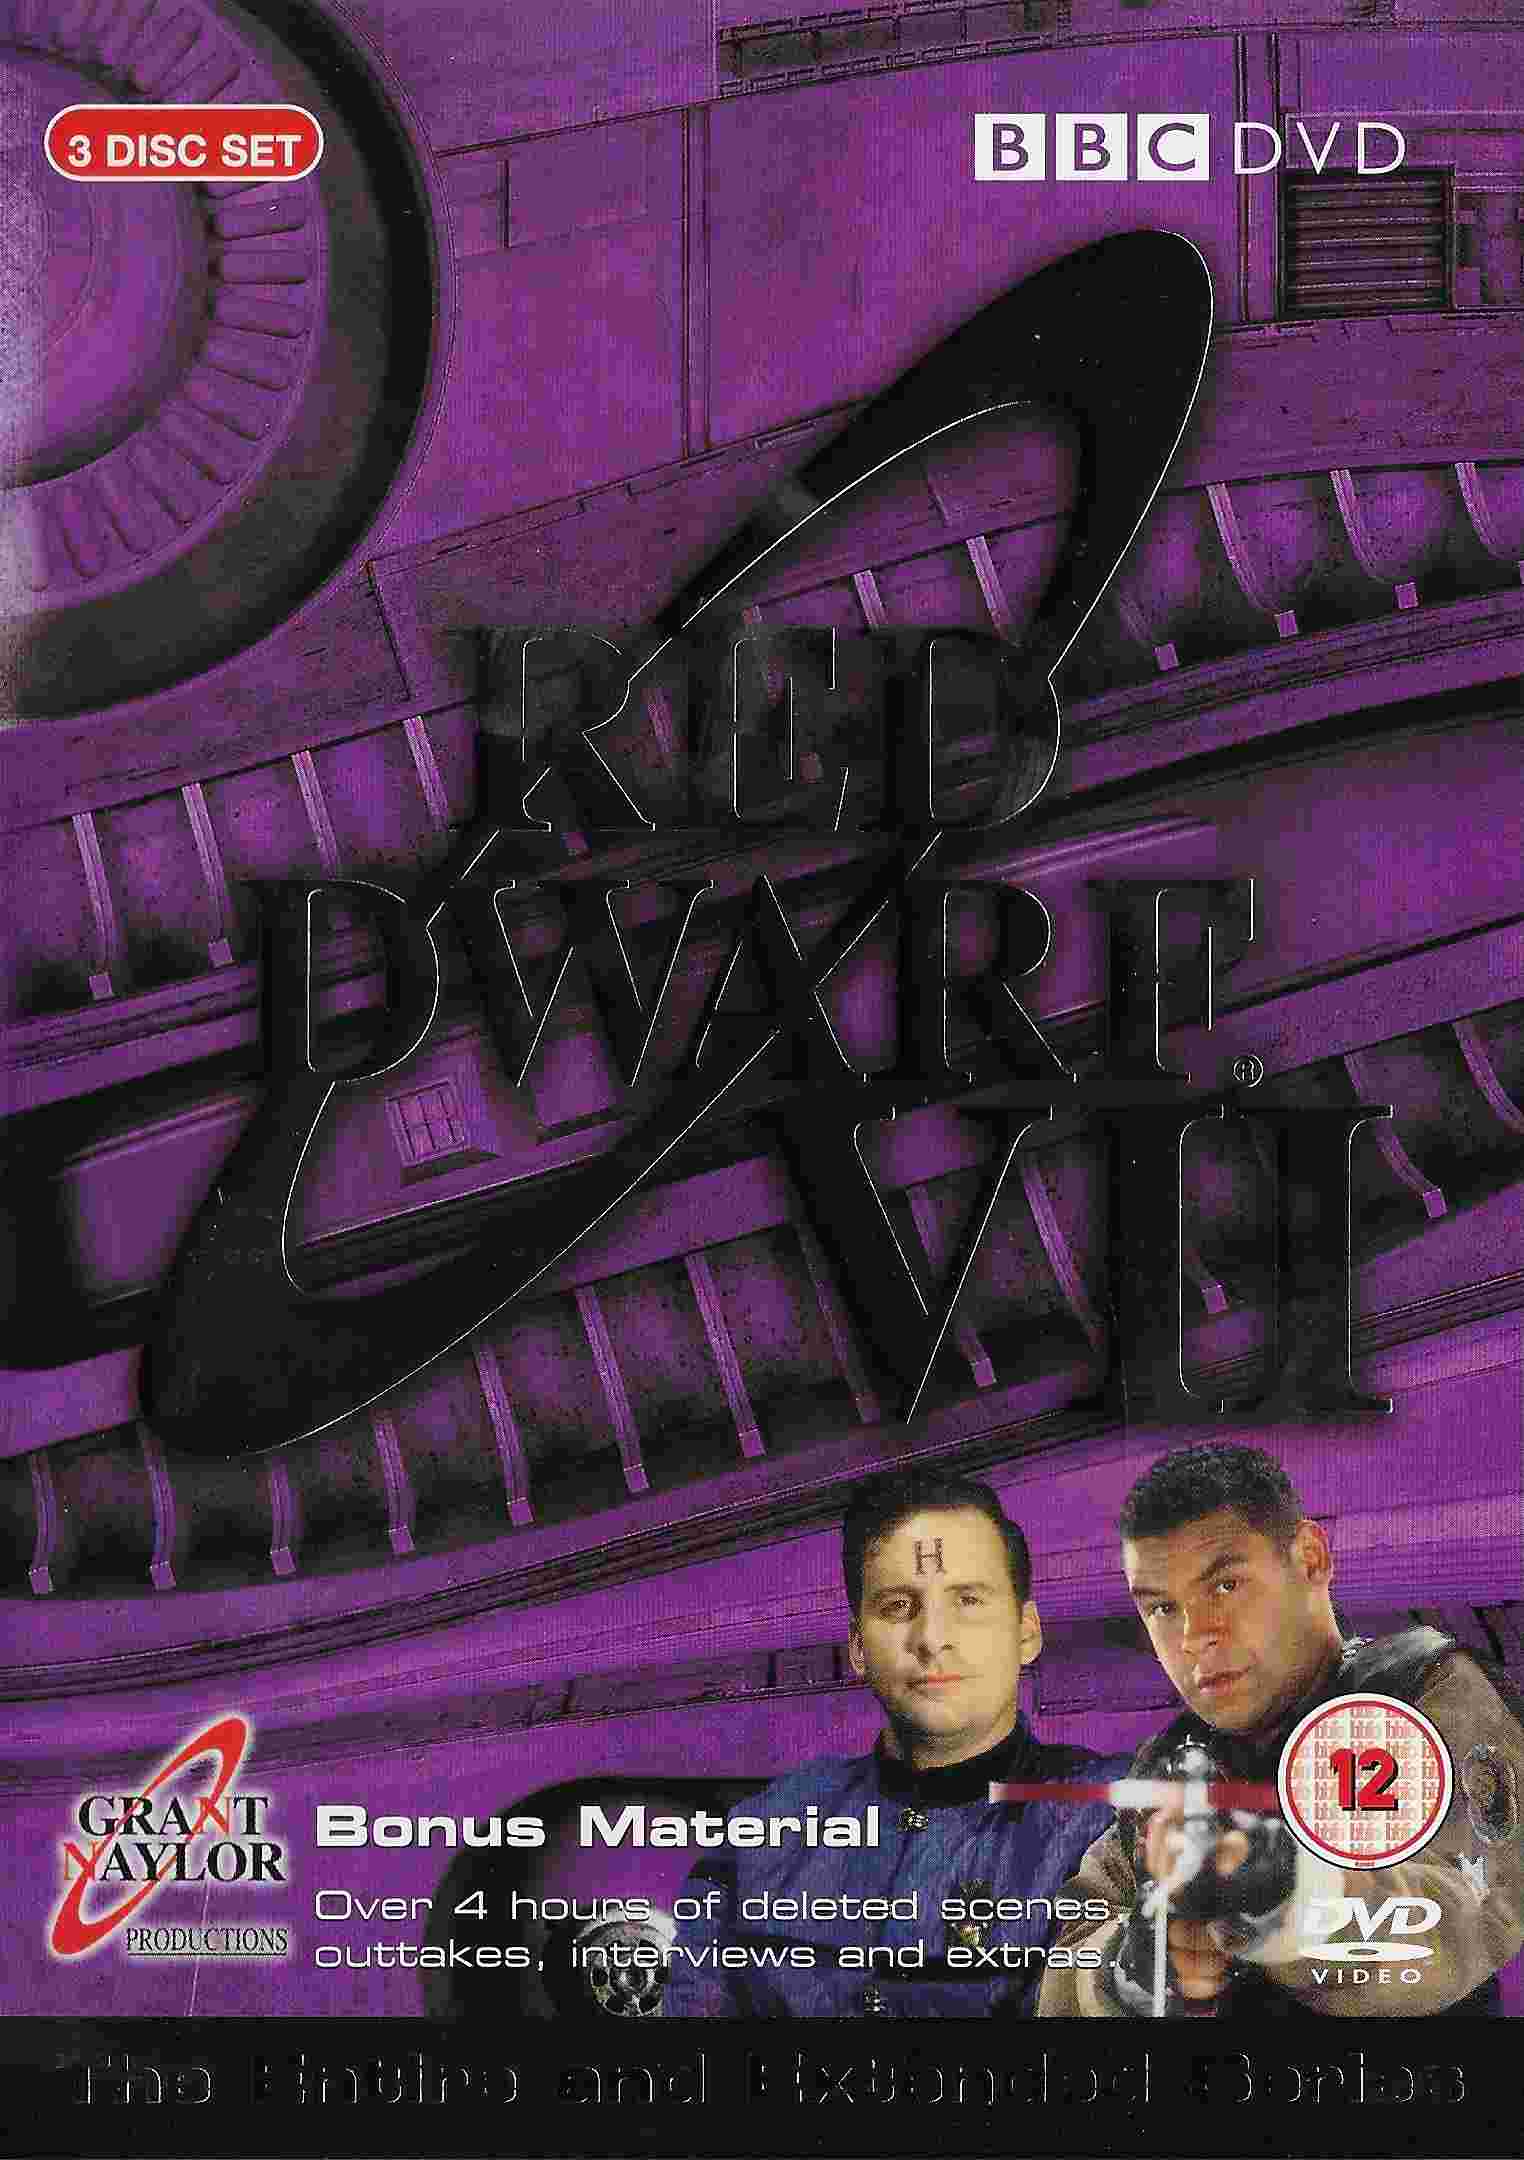 Picture of BBCDVD 1692 Red dwarf - Series VII by artist Rob Grant / Doug Naylor from the BBC records and Tapes library